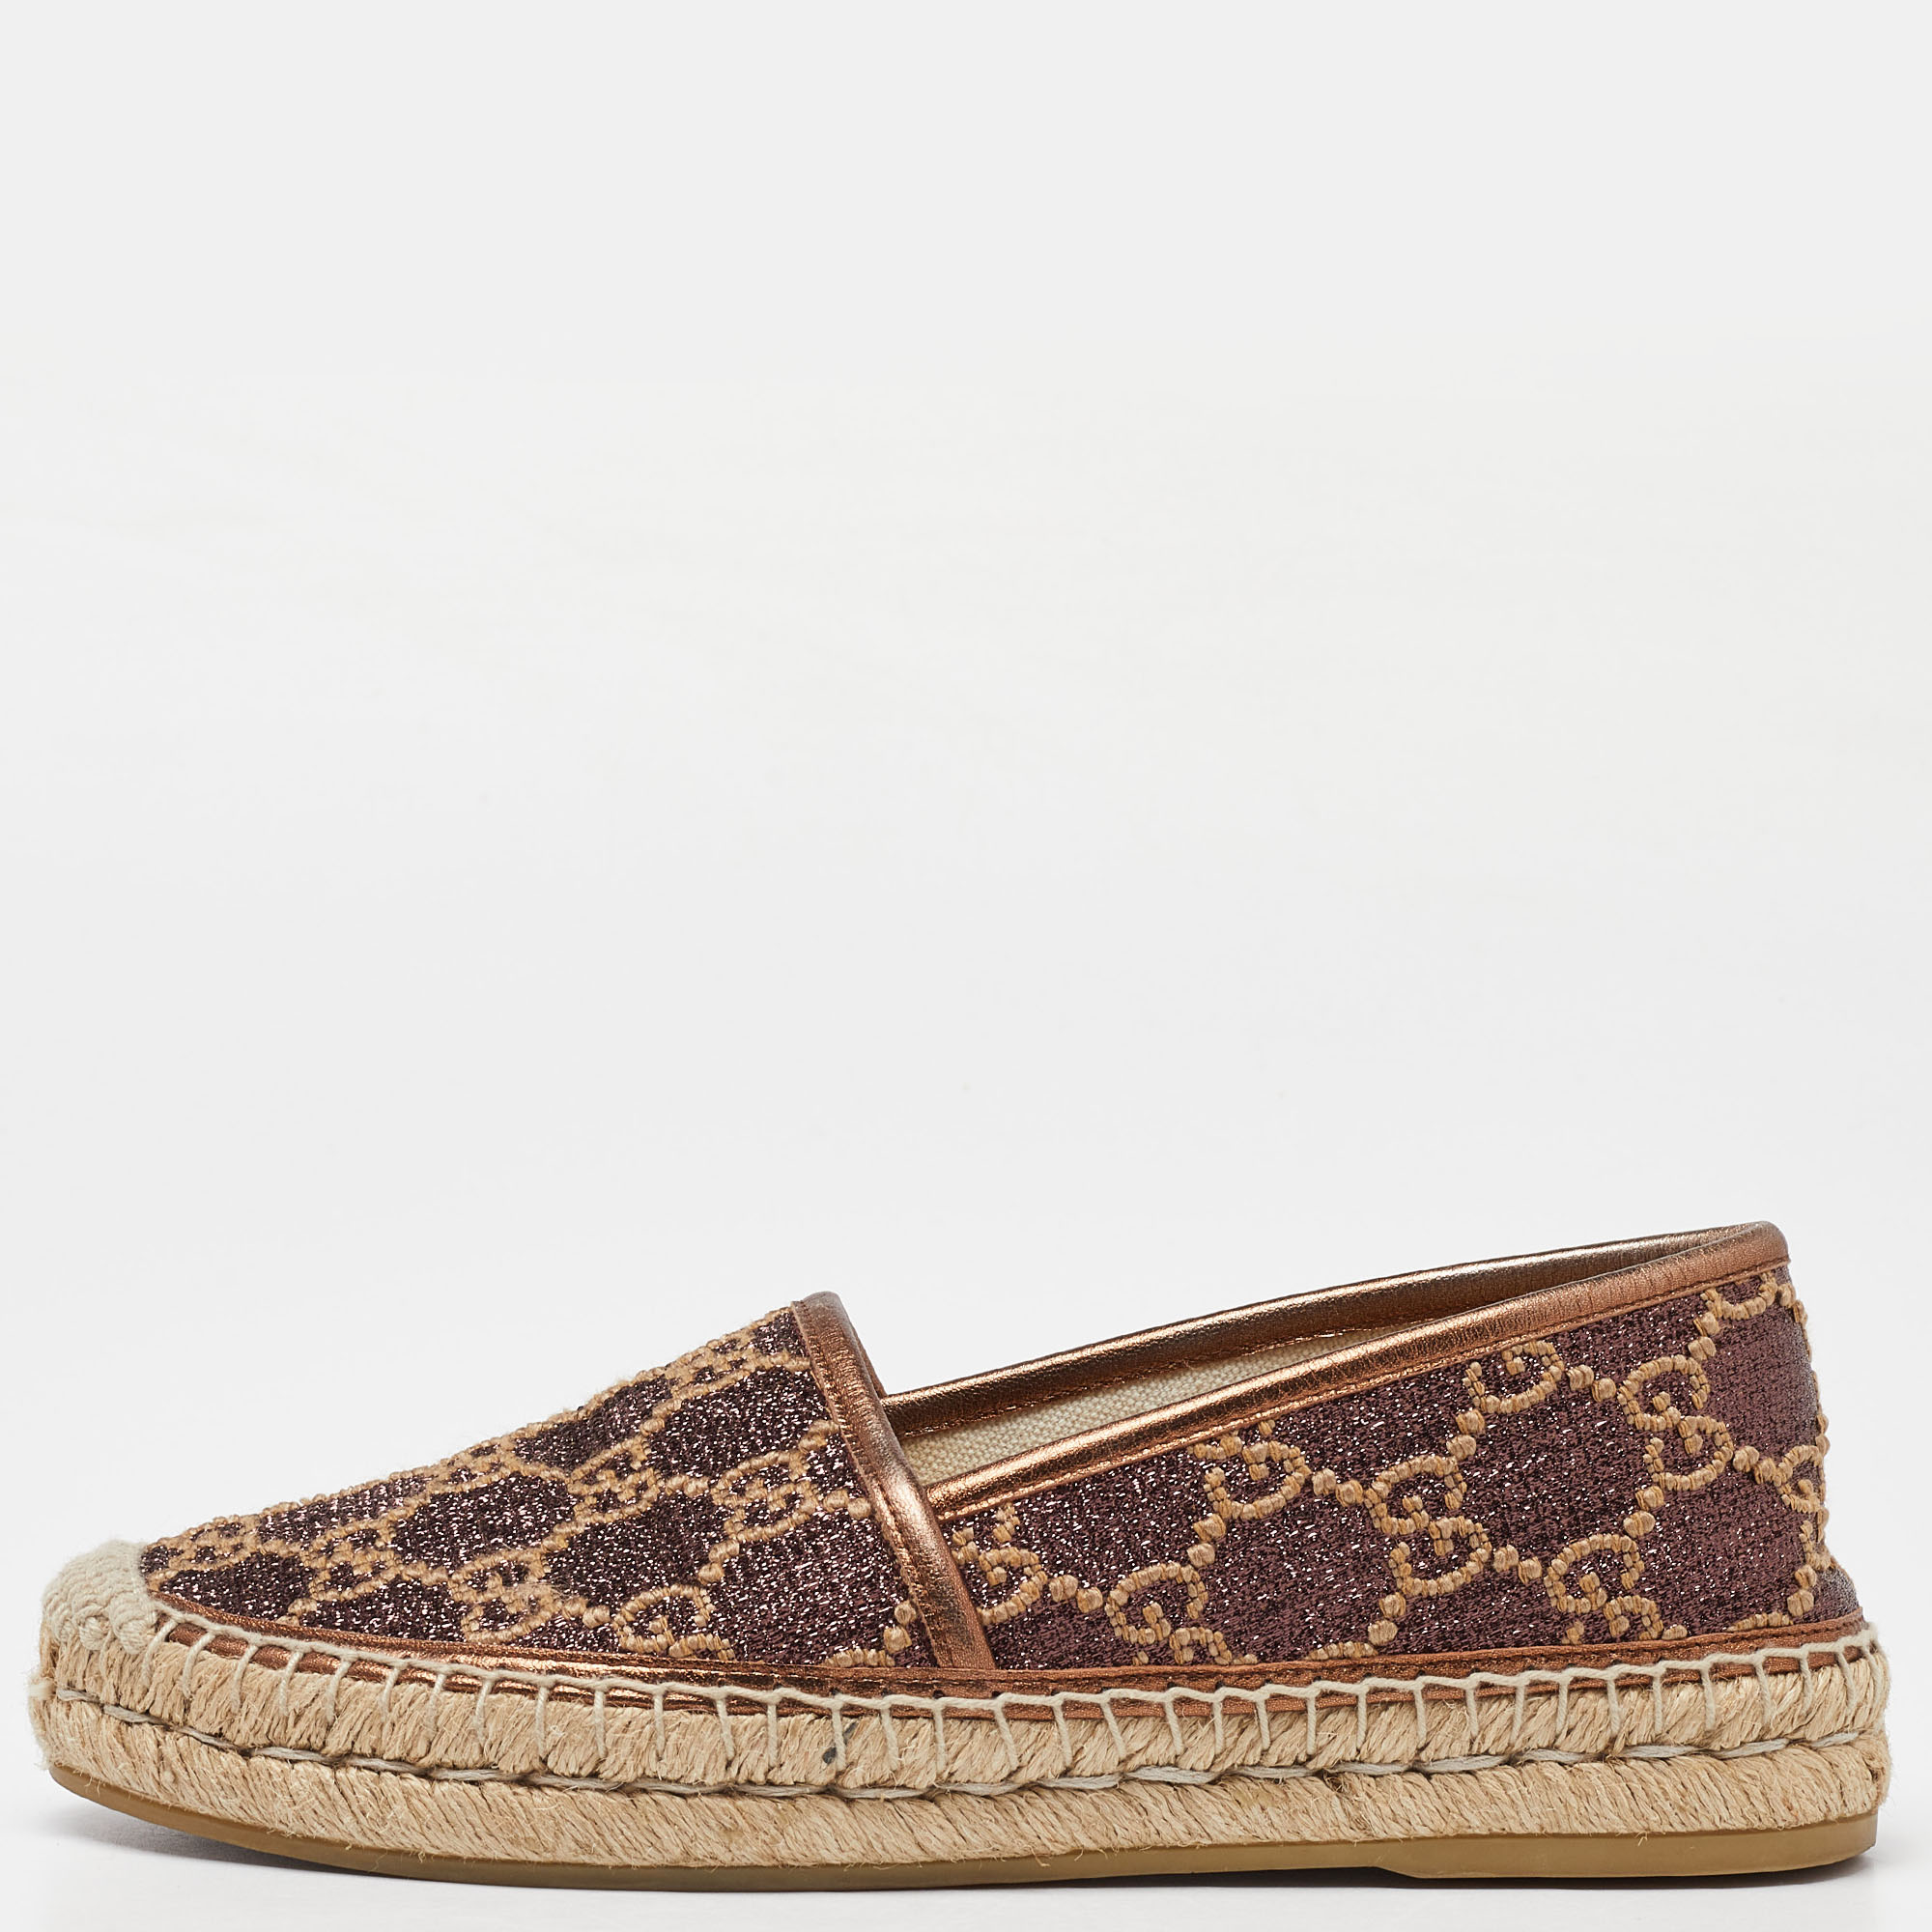 Gucci brown gg glitter leather espadrille flats size 36